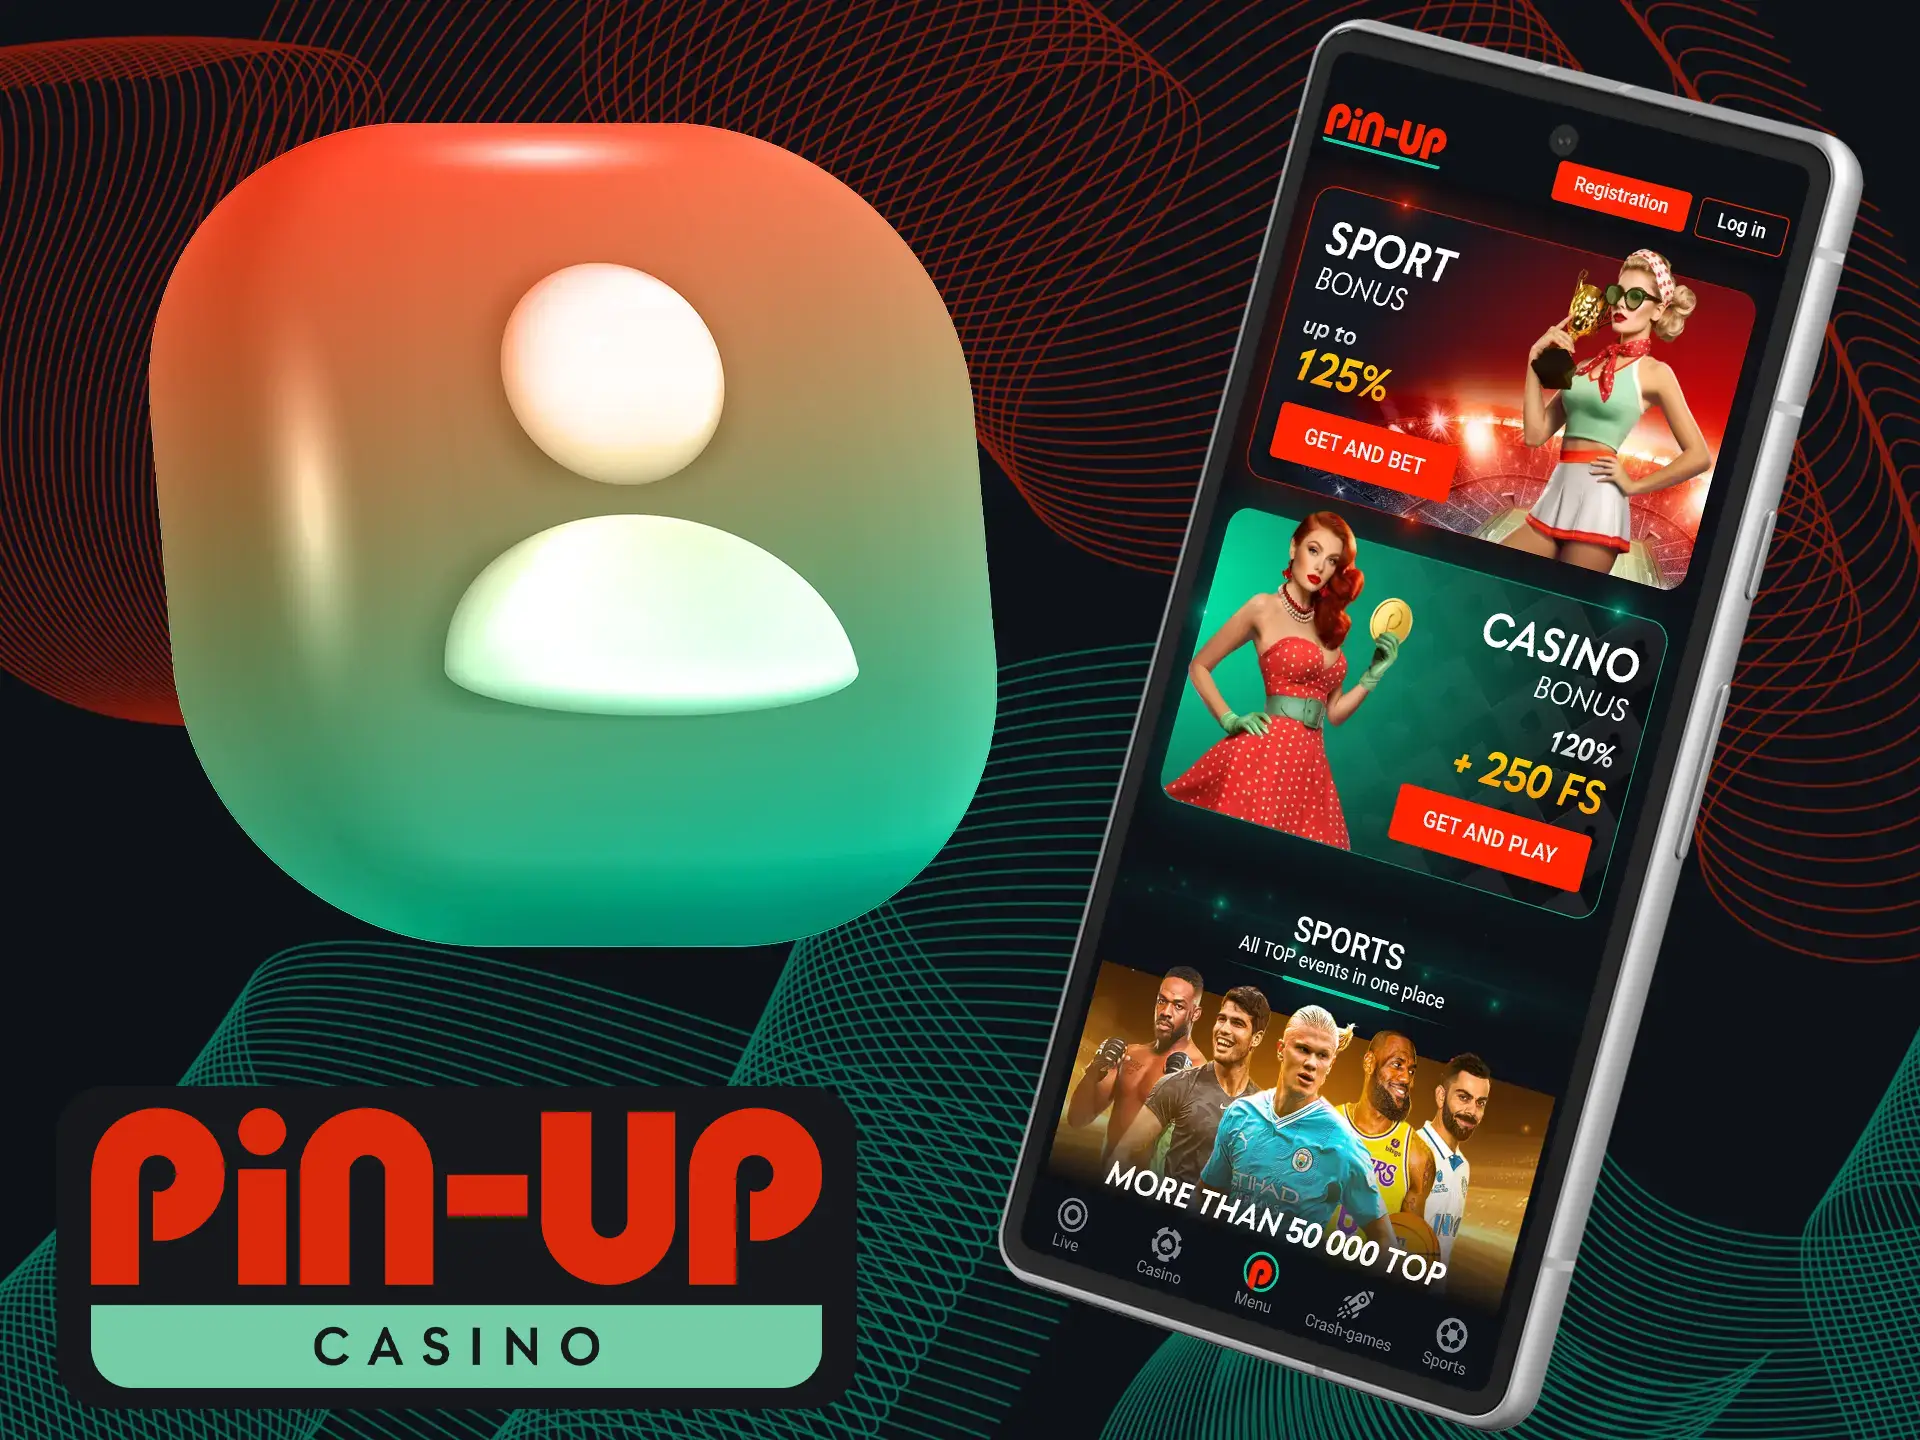 Check out the step-by-step instructions on how to log into the Pin-Up Casino app.